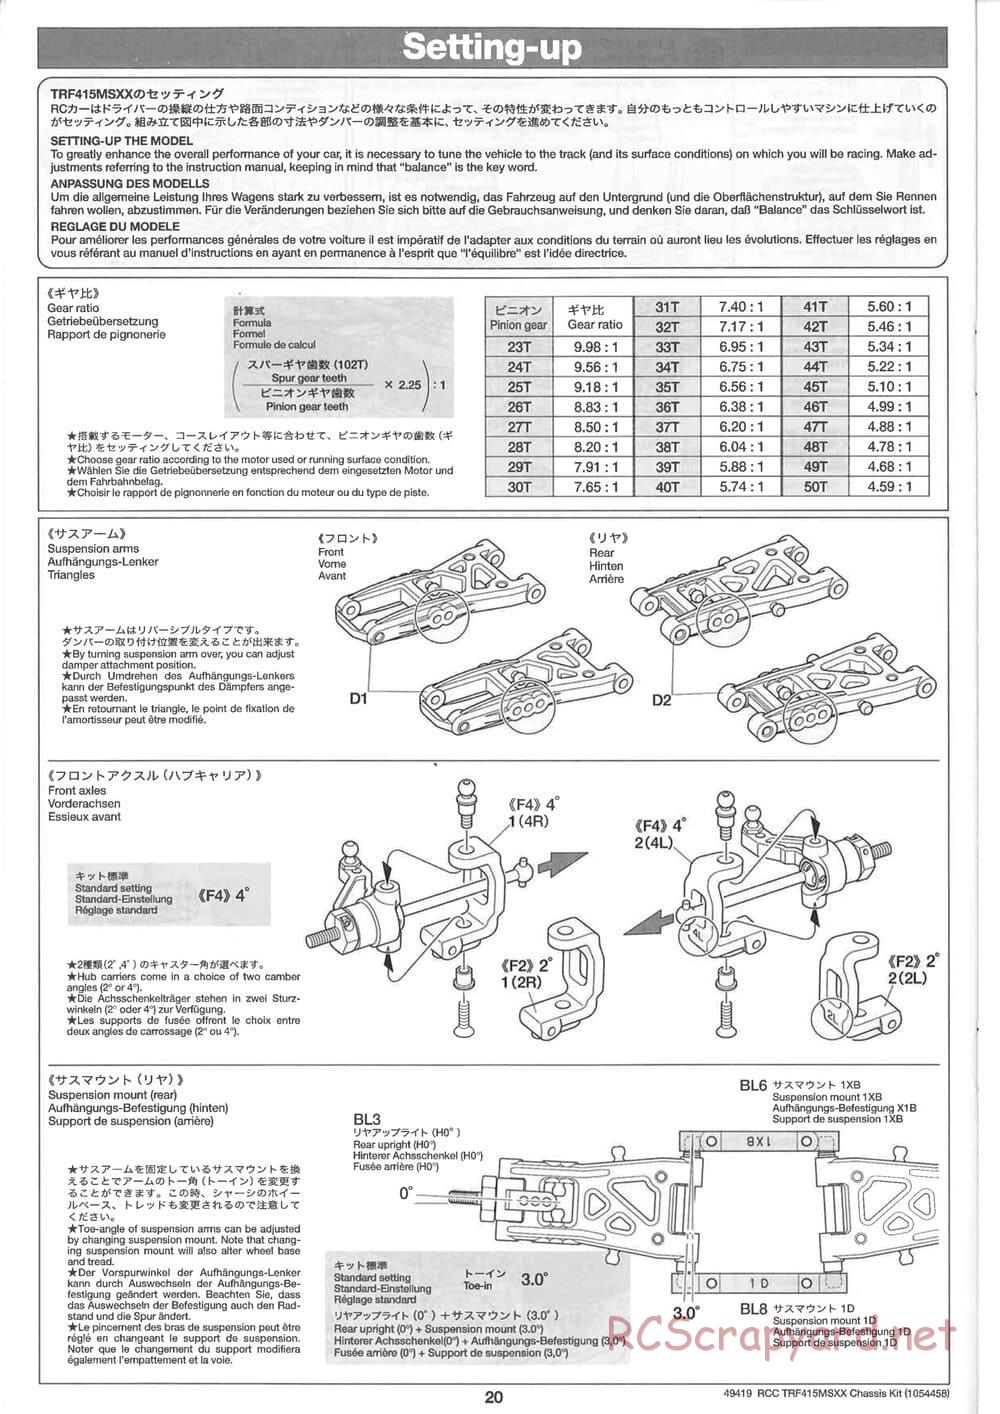 Tamiya - TRF415-MSXX Chassis - Manual - Page 20